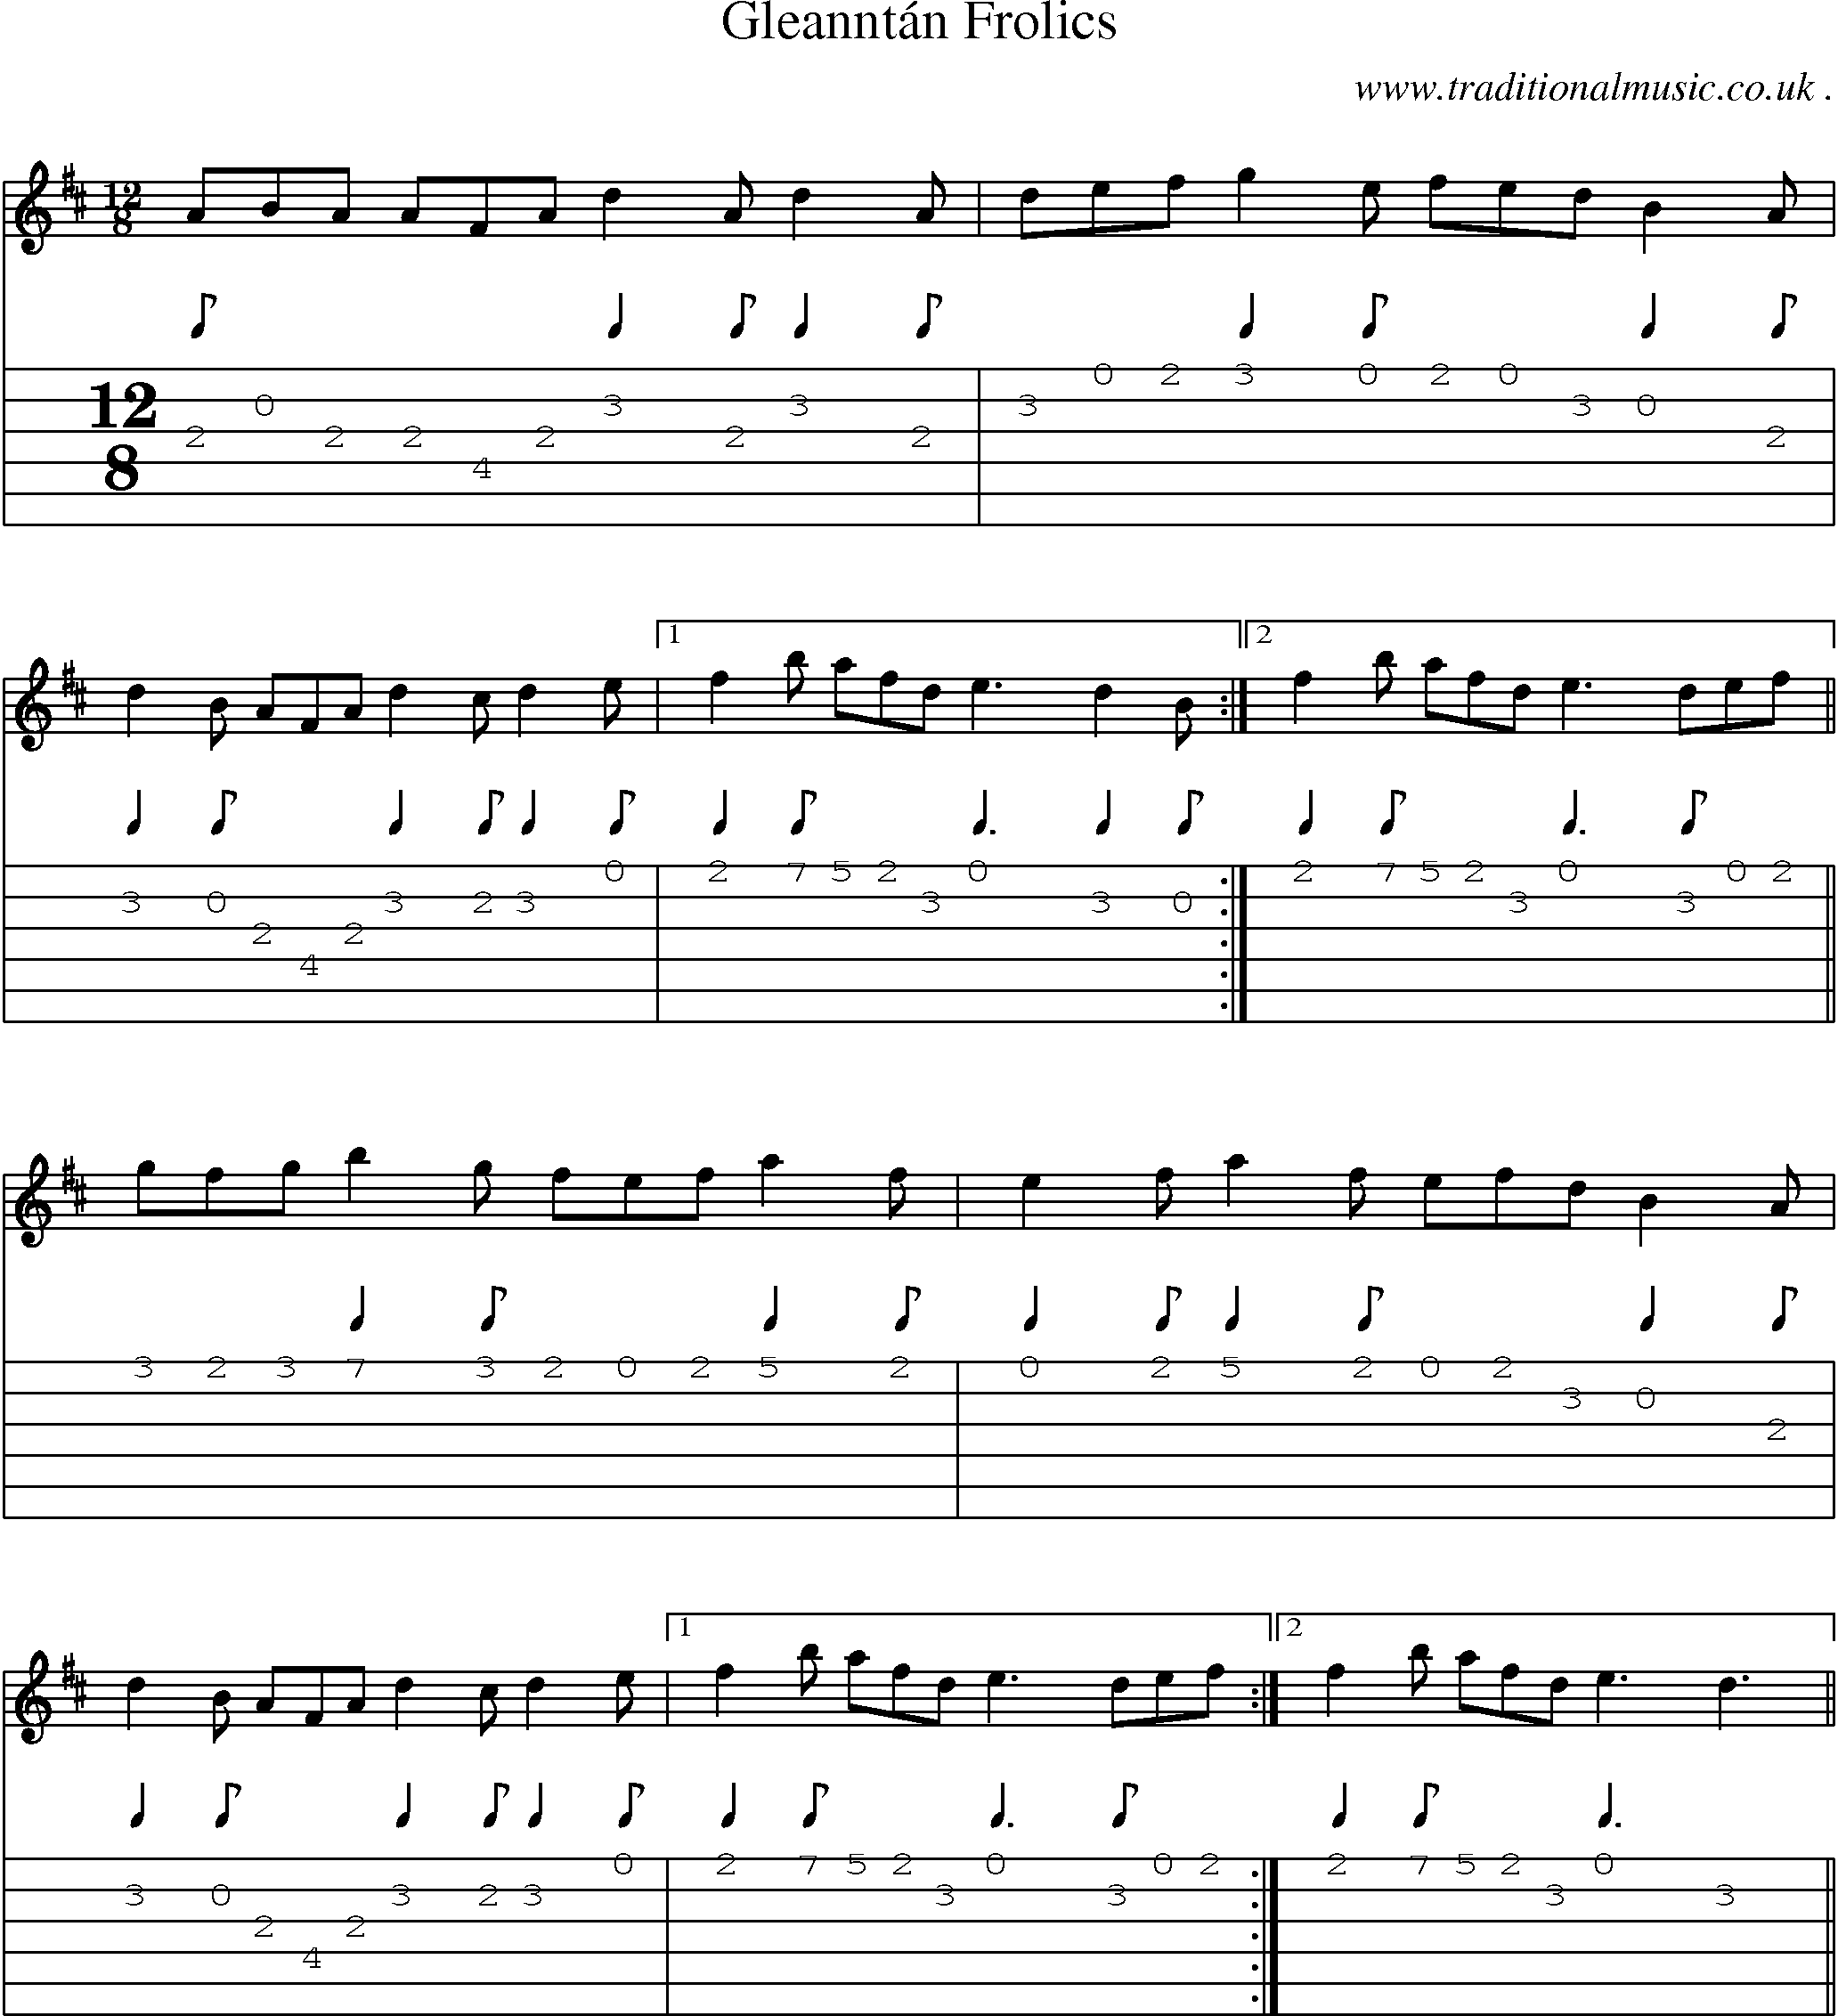 Sheet-music  score, Chords and Guitar Tabs for Gleanntan Frolics